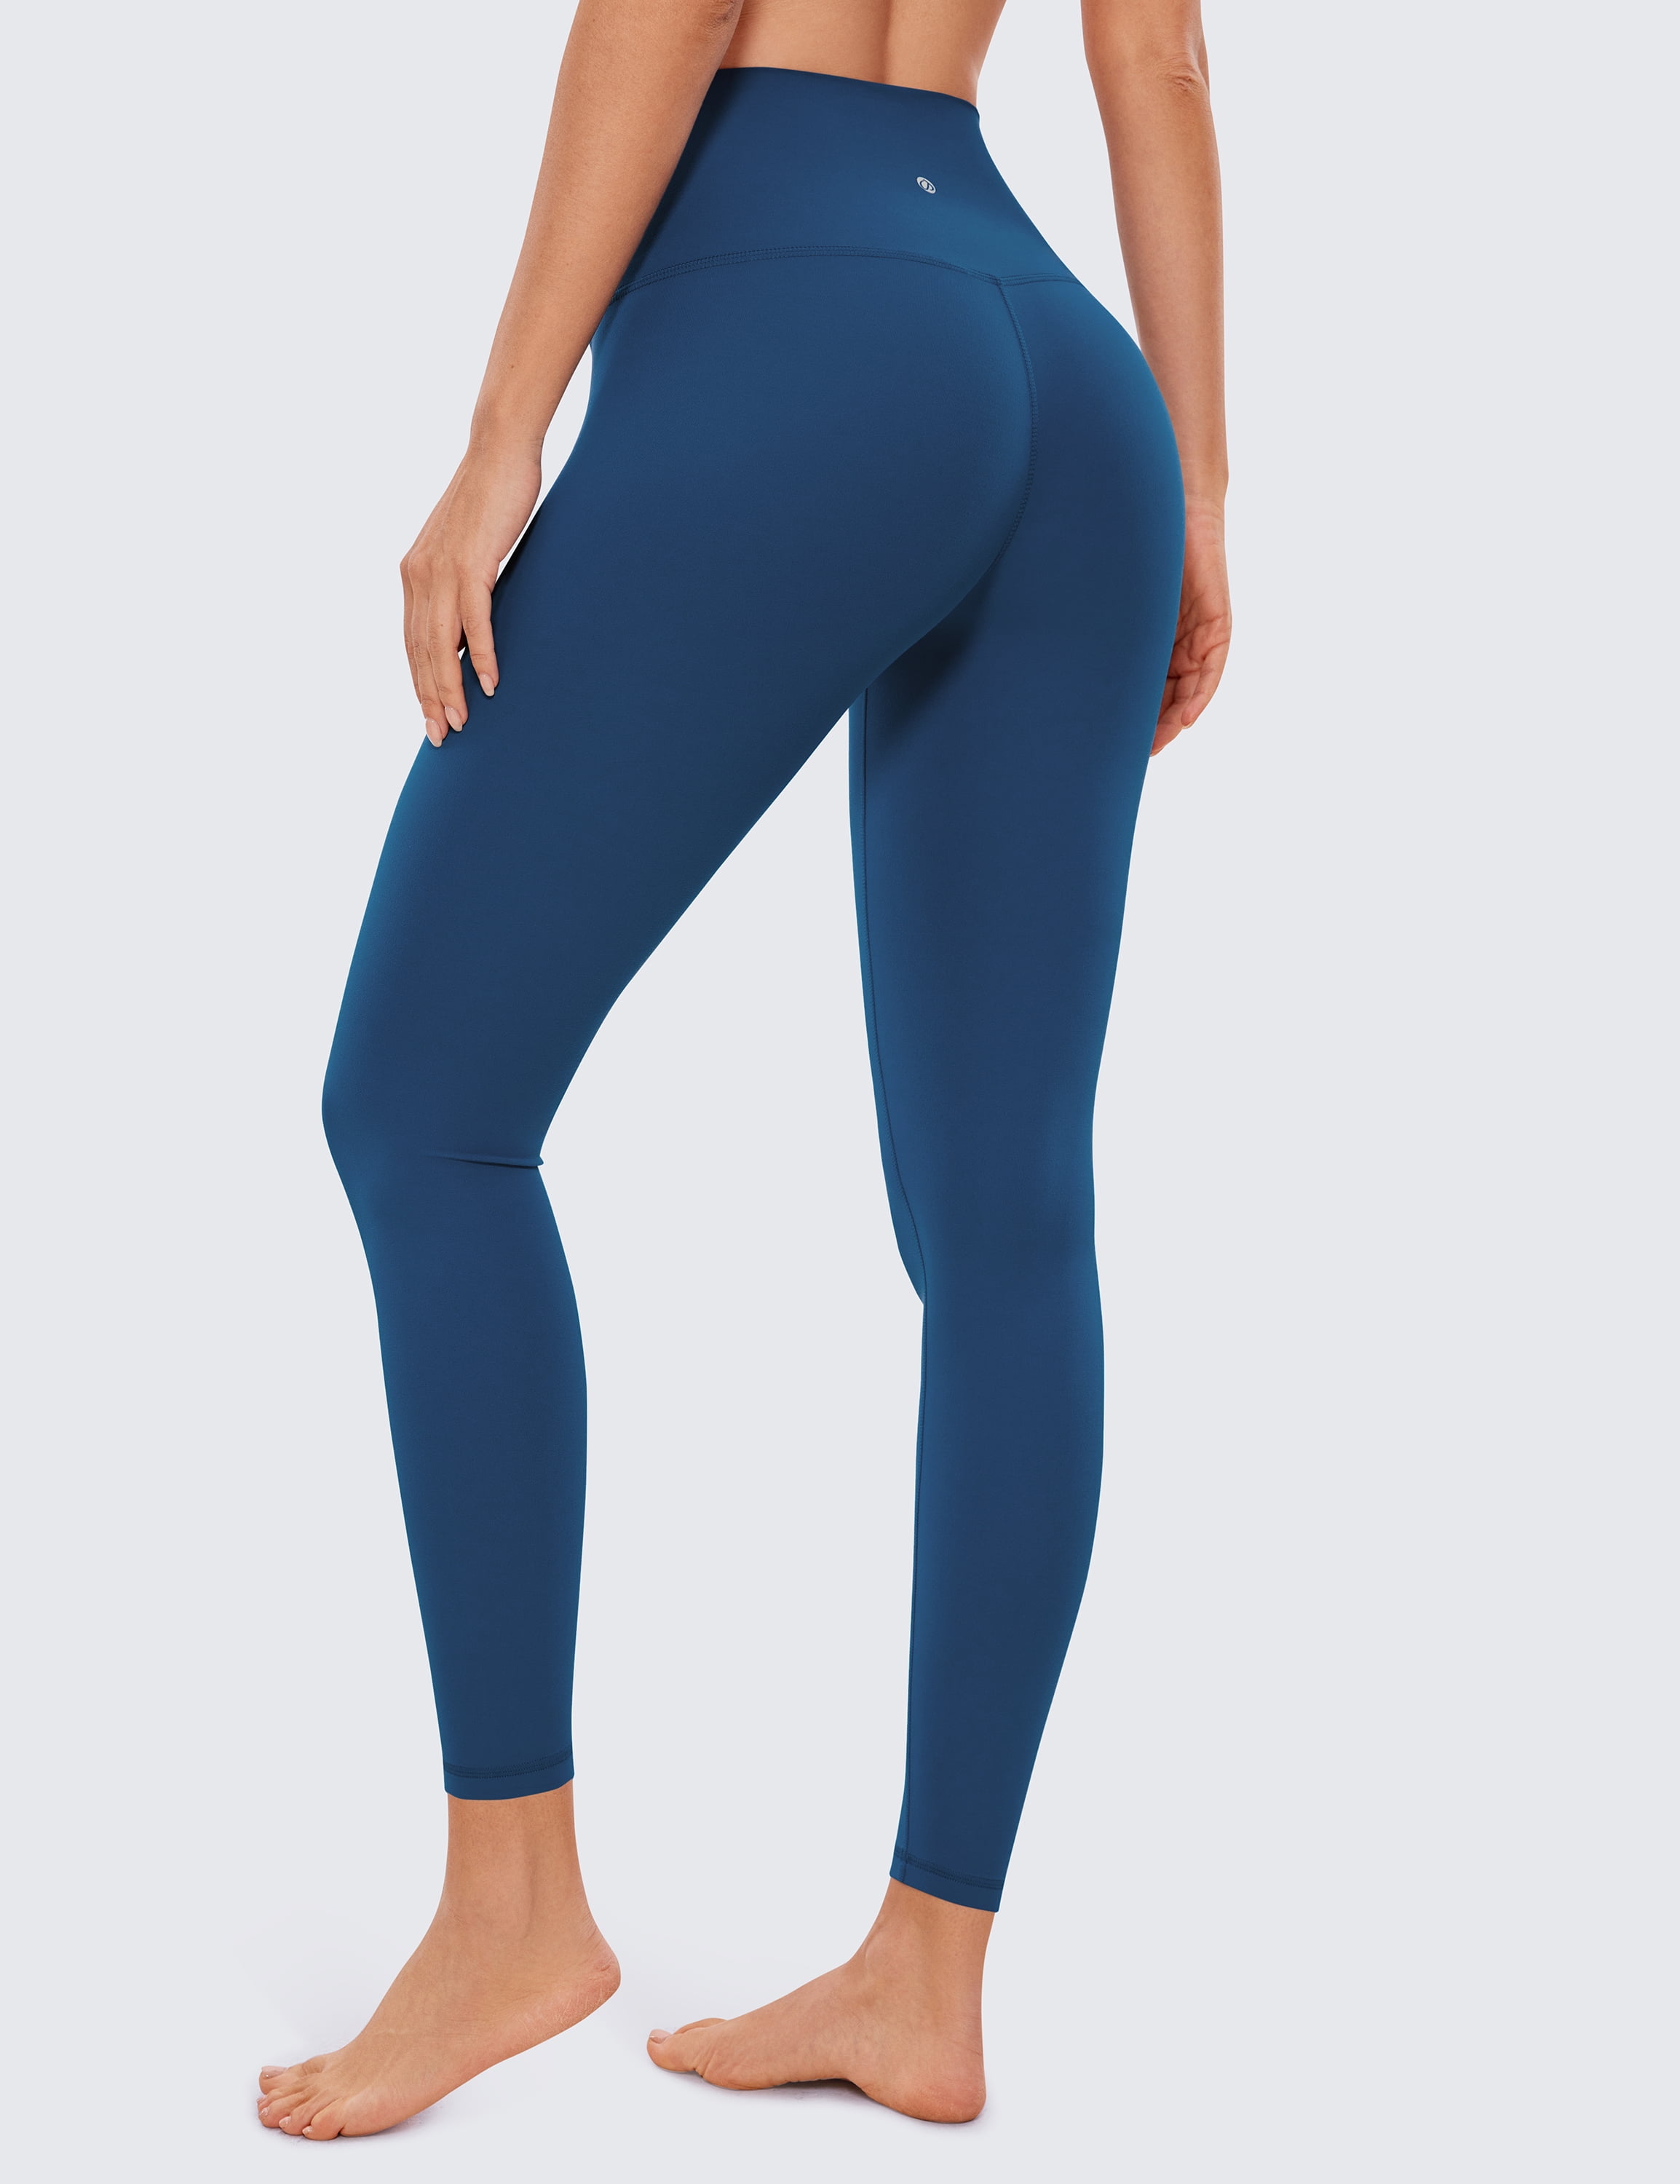 Tomboyx Workout Leggings, 7/8 Length High Waisted Active Yoga Pants With Pockets  For Women, Plus Size Inclusive (xs-6x) Chrome Blue Medium : Target